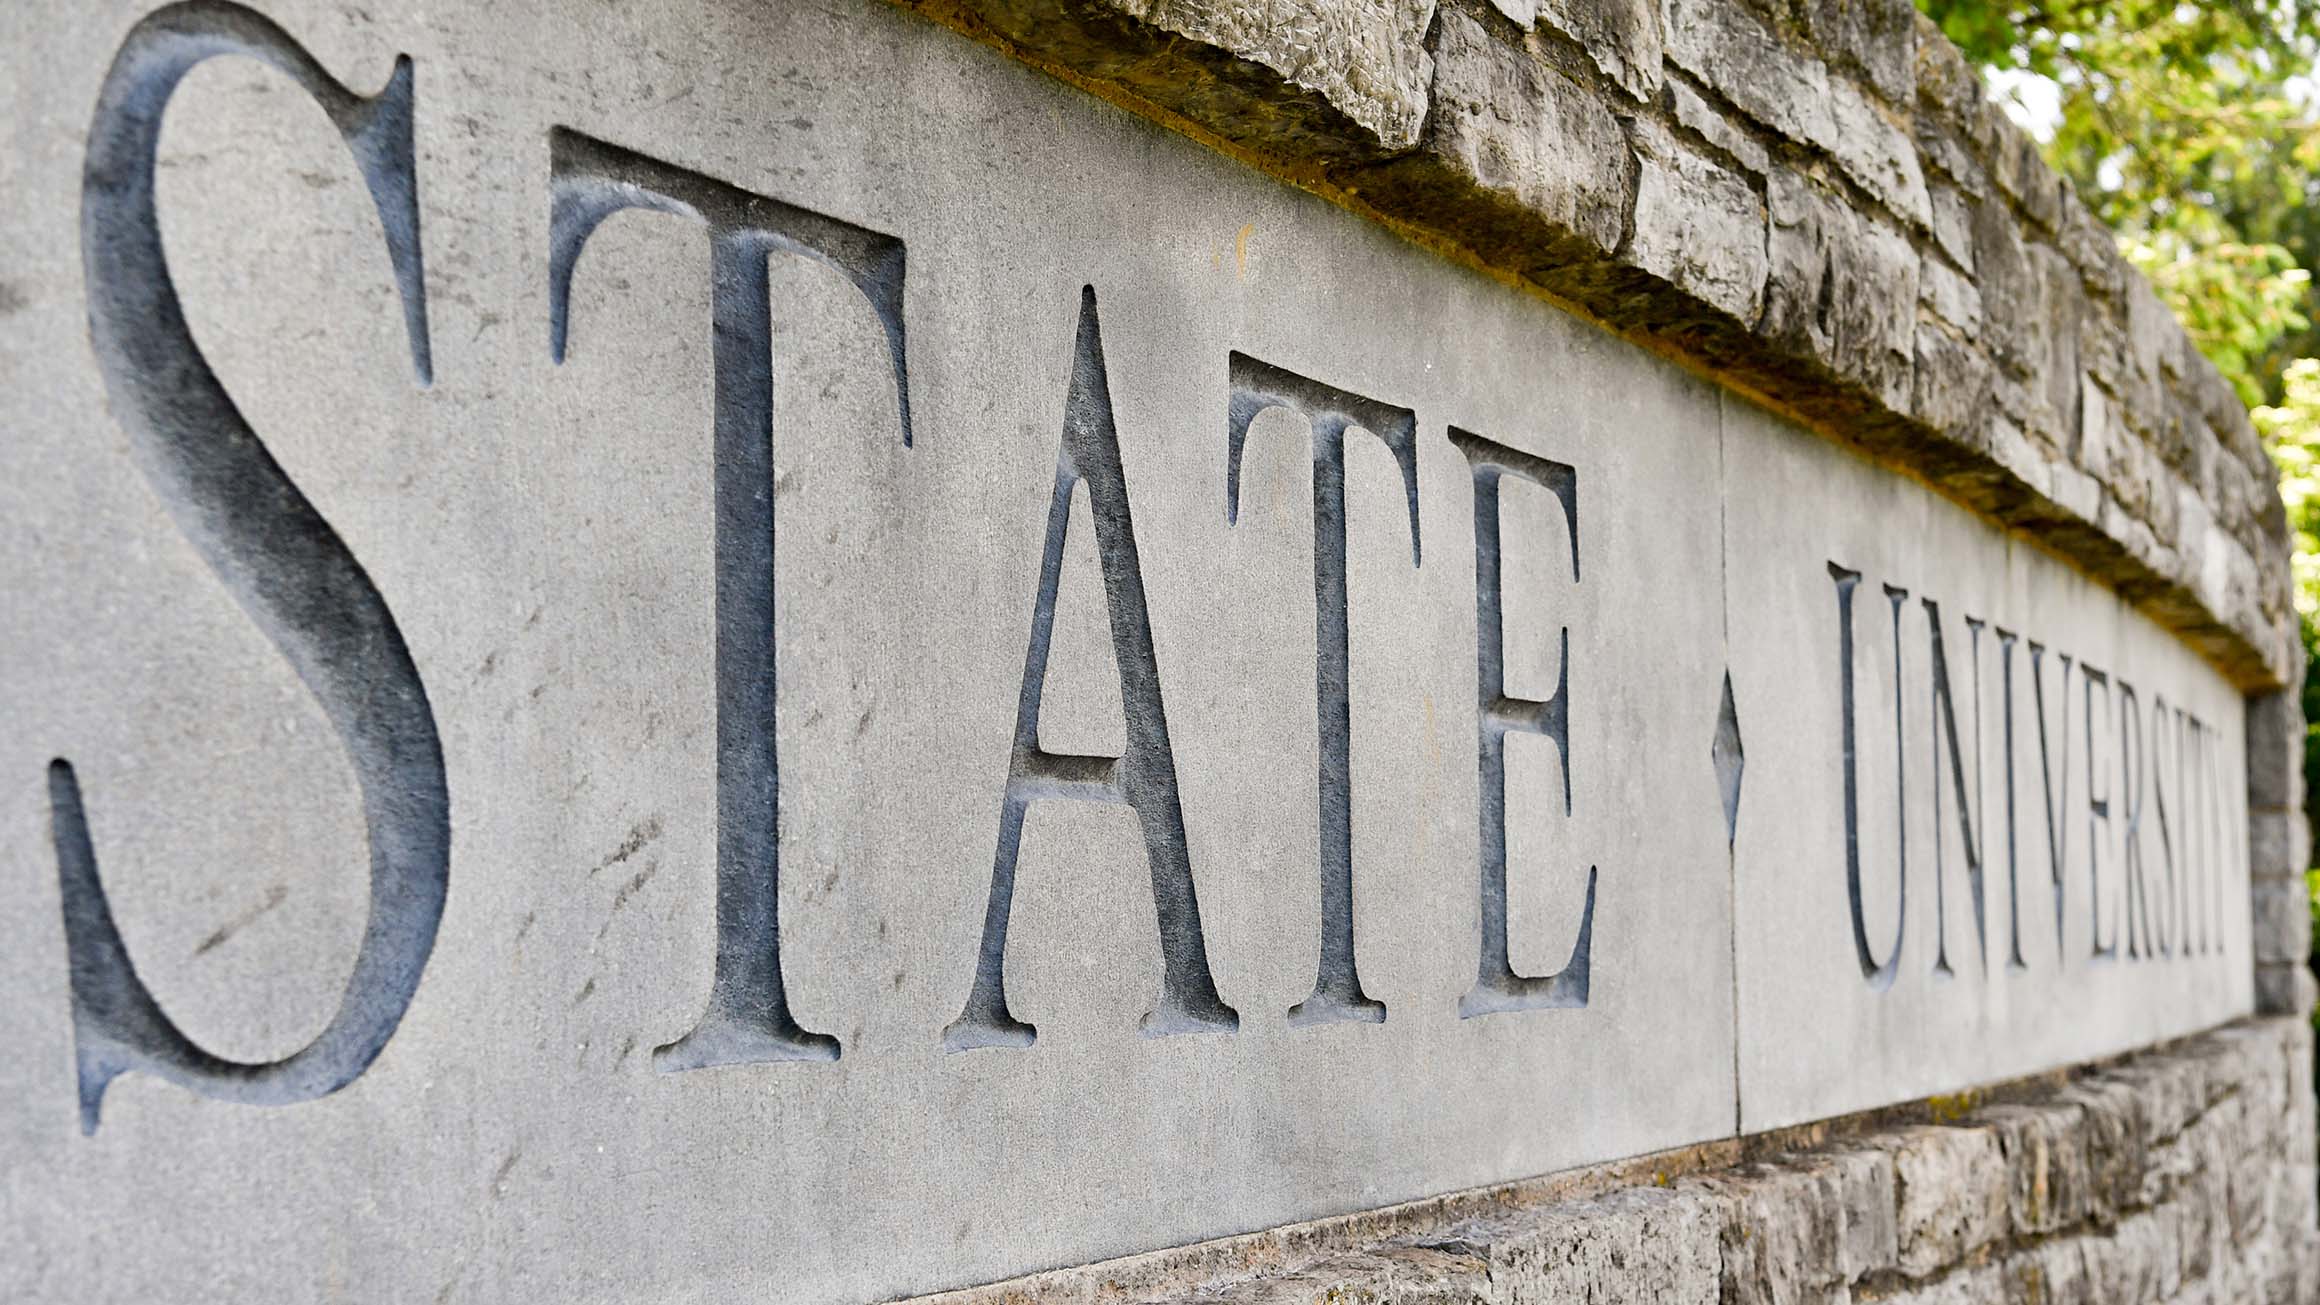 The words "State University" are shown on a stone wall